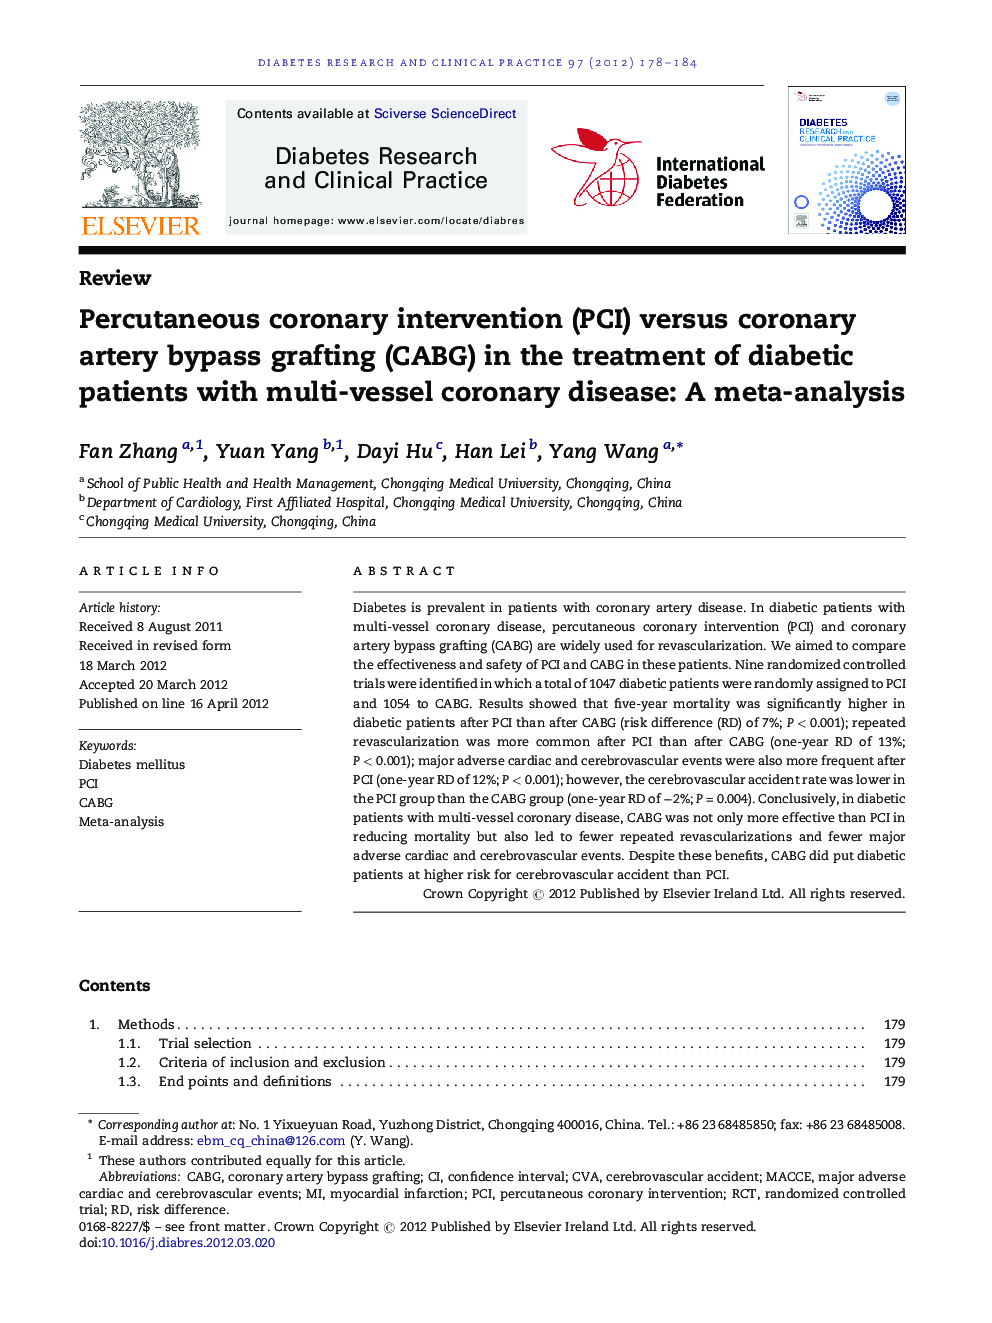 Percutaneous coronary intervention (PCI) versus coronary artery bypass grafting (CABG) in the treatment of diabetic patients with multi-vessel coronary disease: A meta-analysis